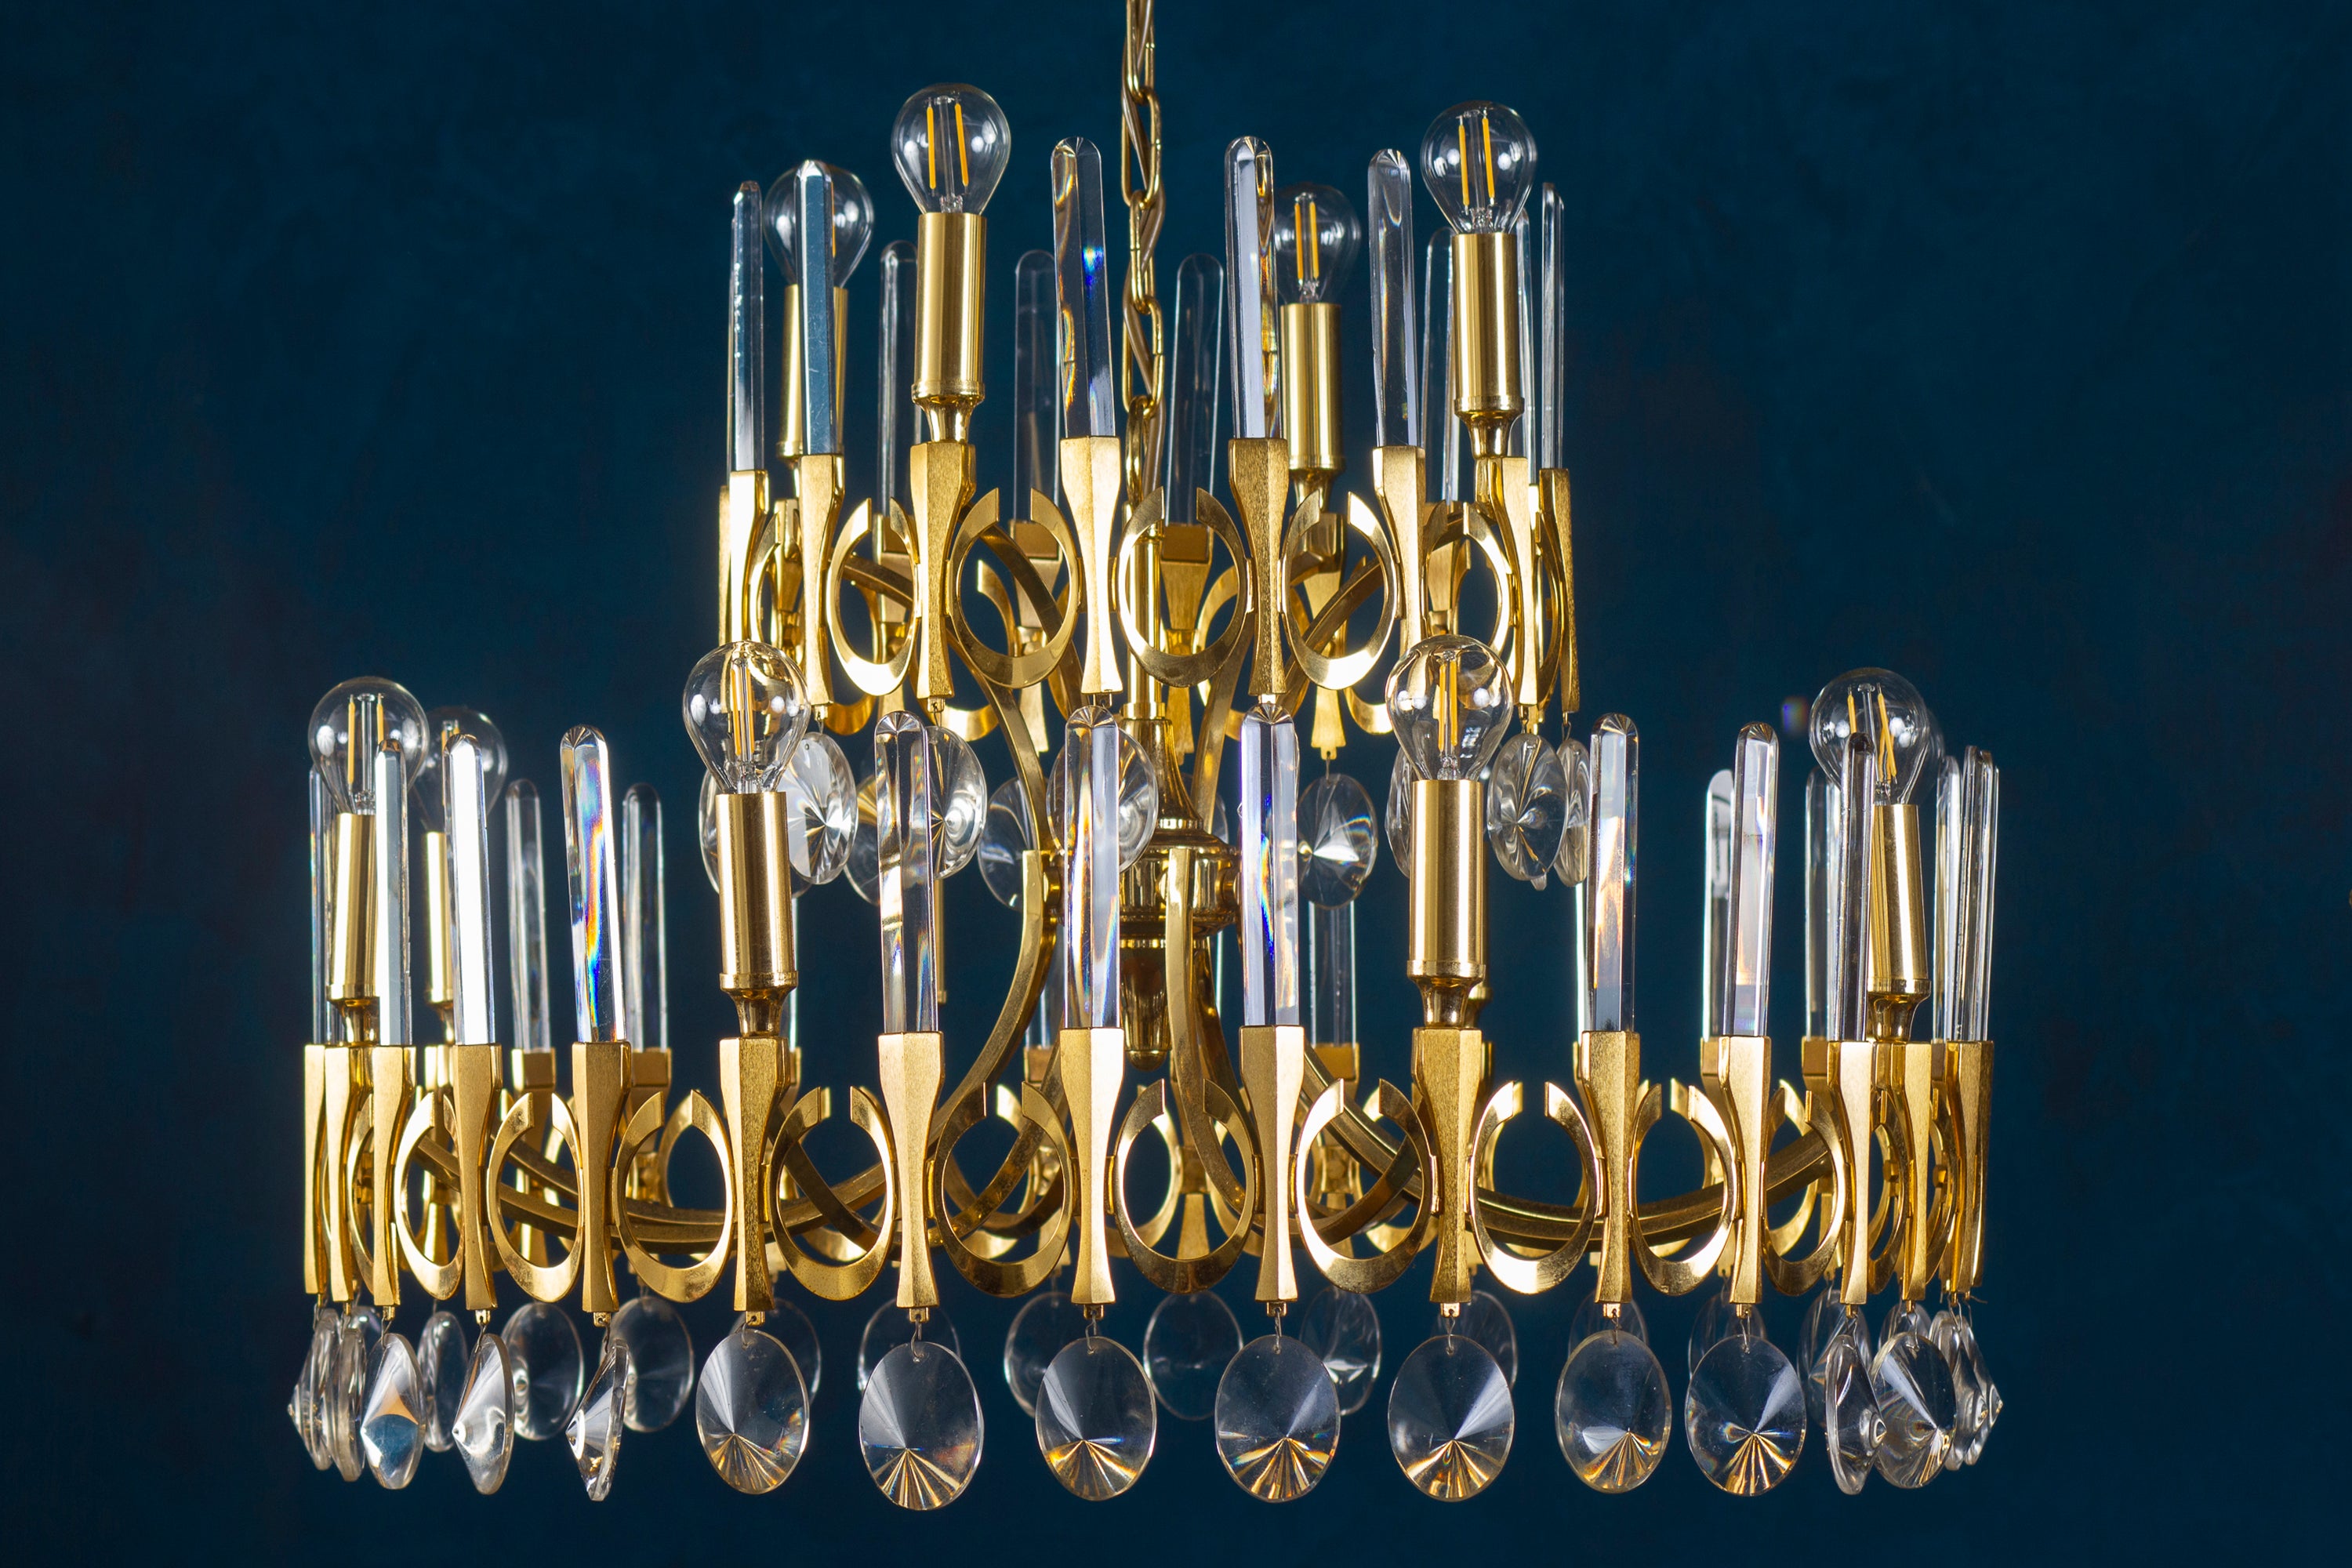 Italian, large midcentury Gaetano Sciolari two-tier chandelier featuring in the original brass finish with fine Murano glass drops Top tier holds six sockets, bottom tier also six sockets for a total of 12 candelabra based sockets. Can use either